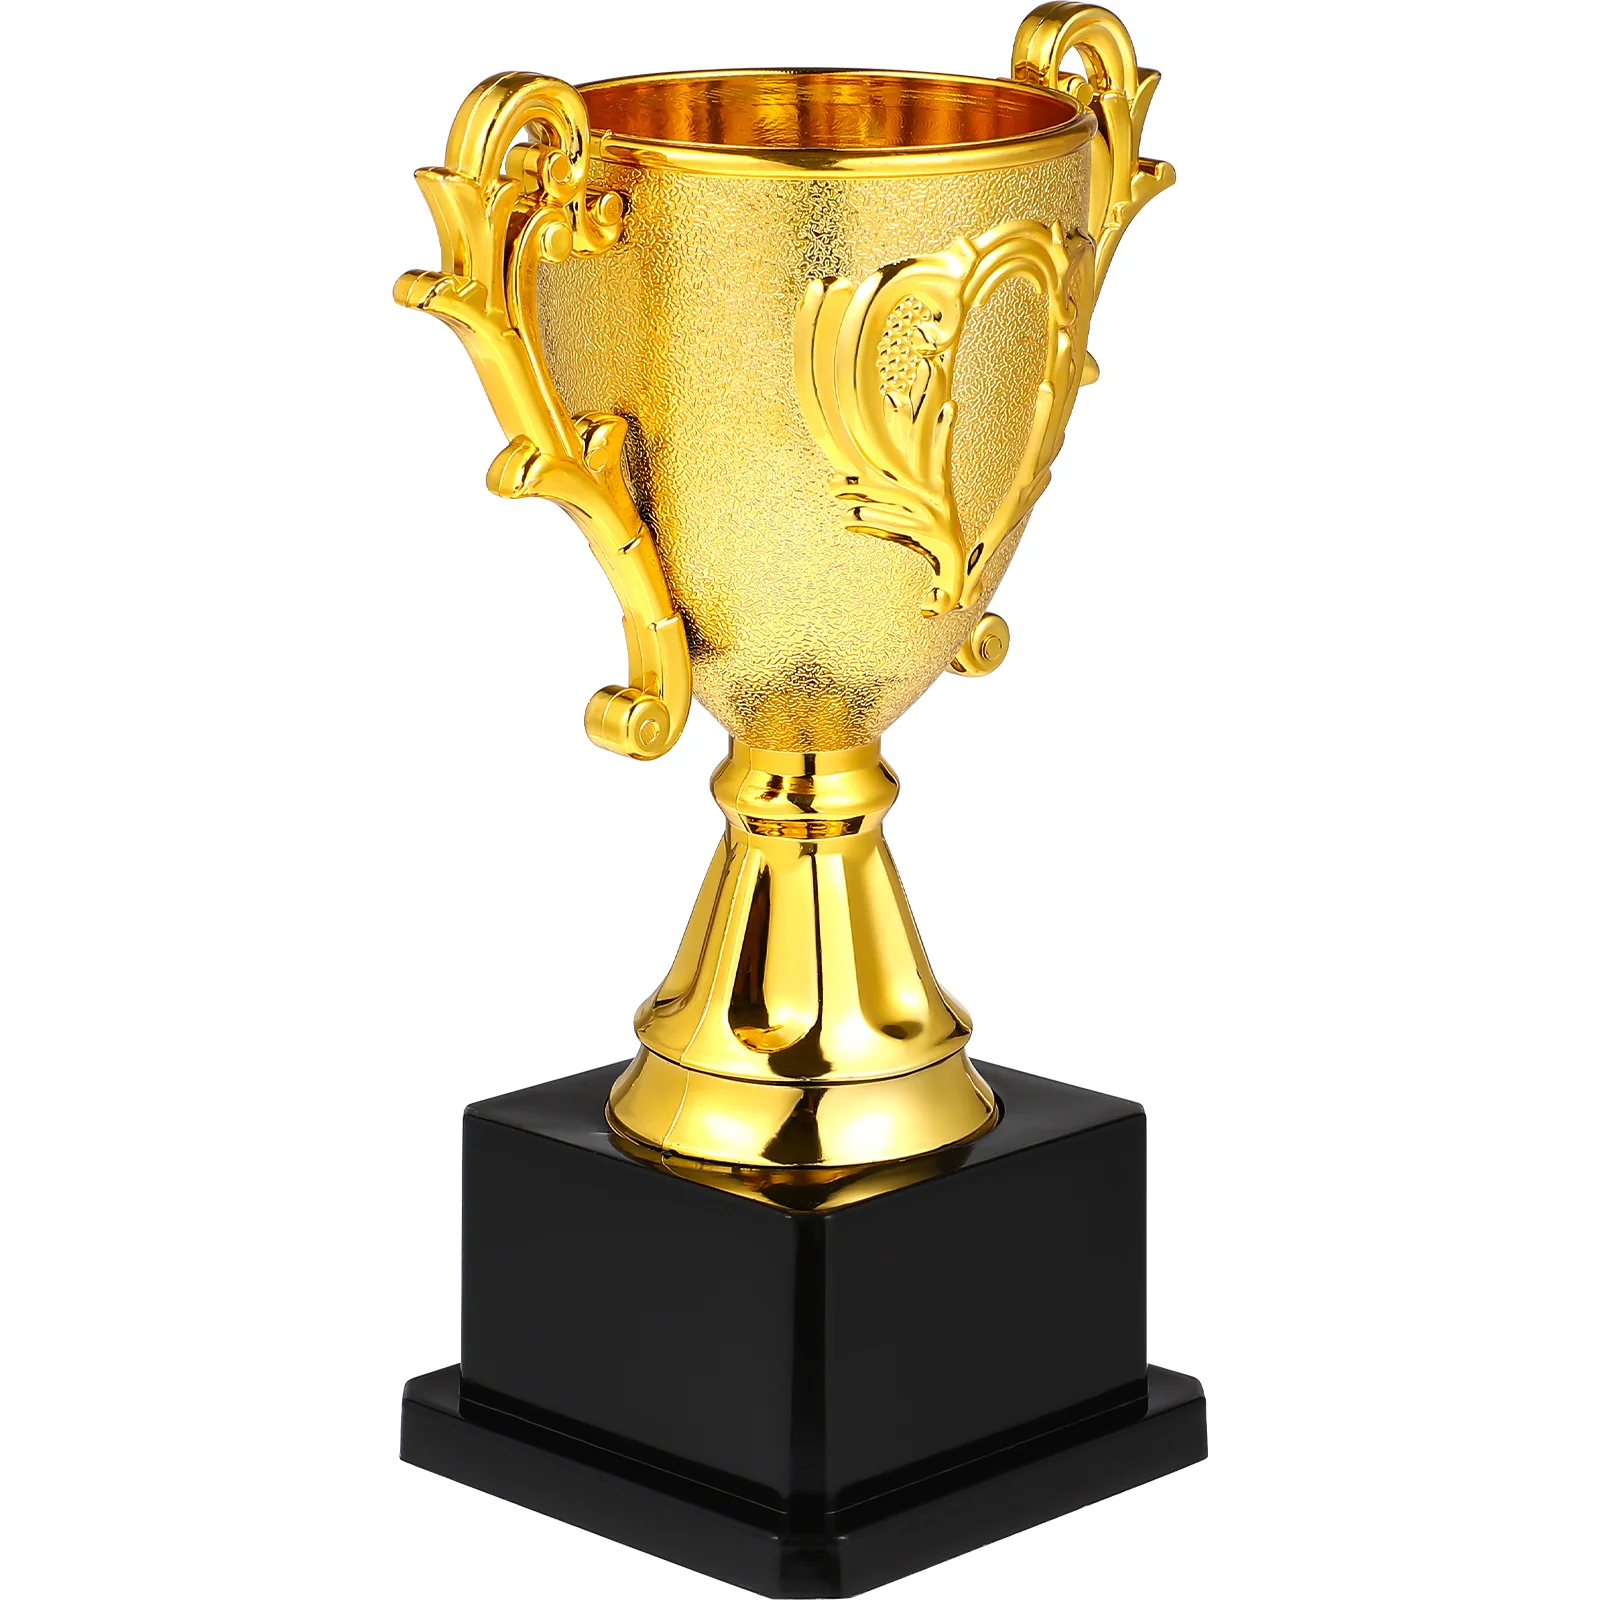 

Mini Golden Award Trophy Plastic Reward Prizes Toys With Base For Kindergarten School Sports Study Competitions Winner